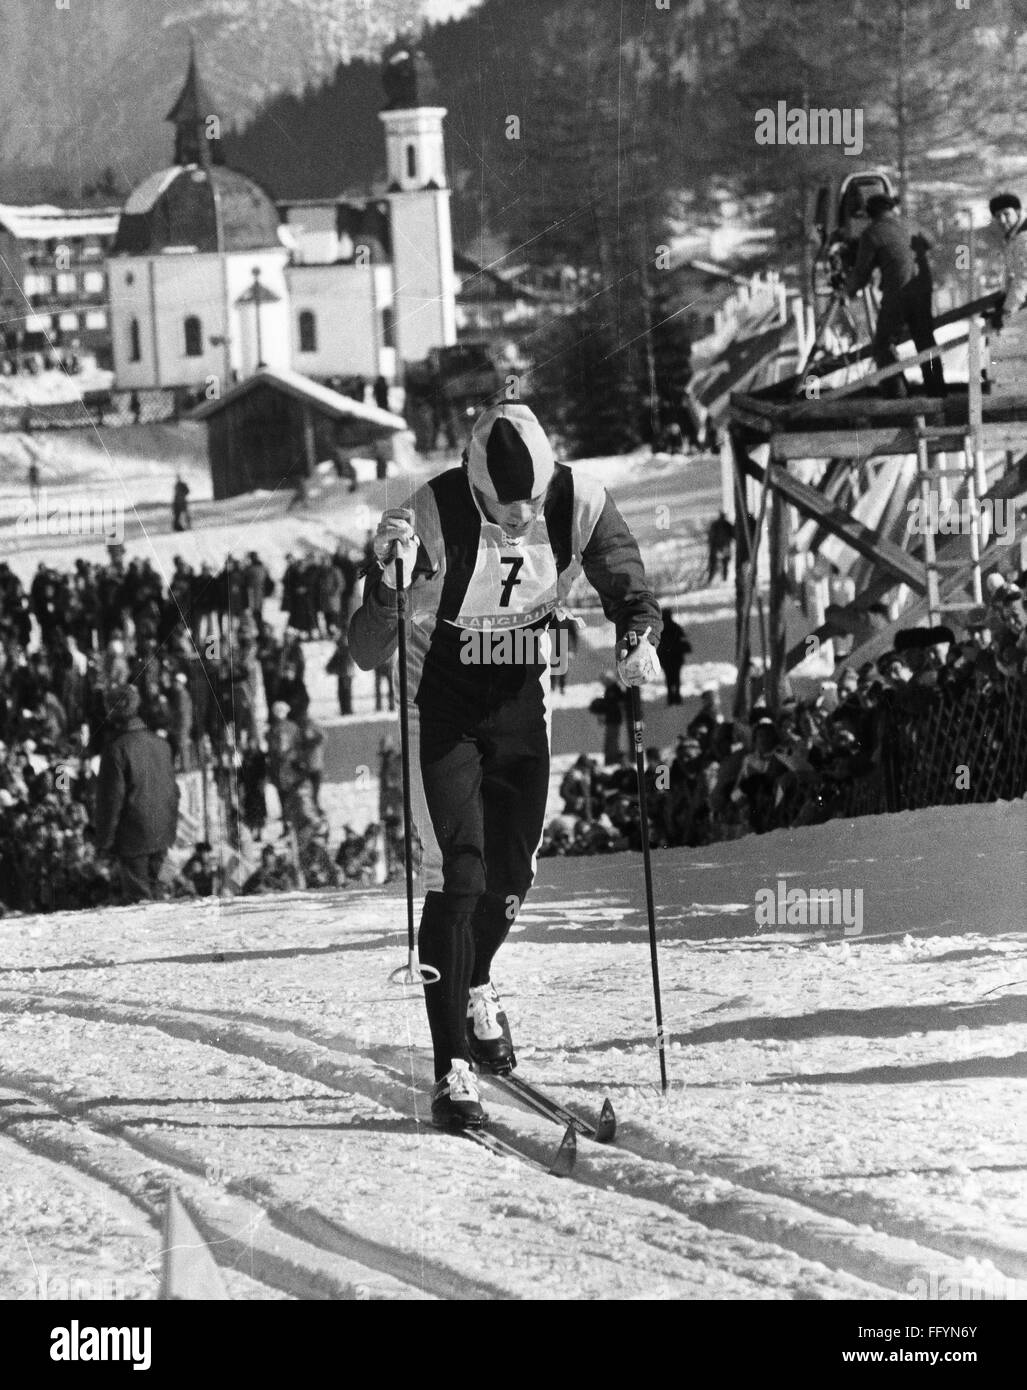 BILL KOCH (1955- ). /nAmerican cross-country skier. Crossing the finish line to win the silver medal in the men's 30 kilomter cross-country race at the Winter Olympic Games in Seefeld, near Innsbruck, Austria, 5 February 1976. Stock Photo